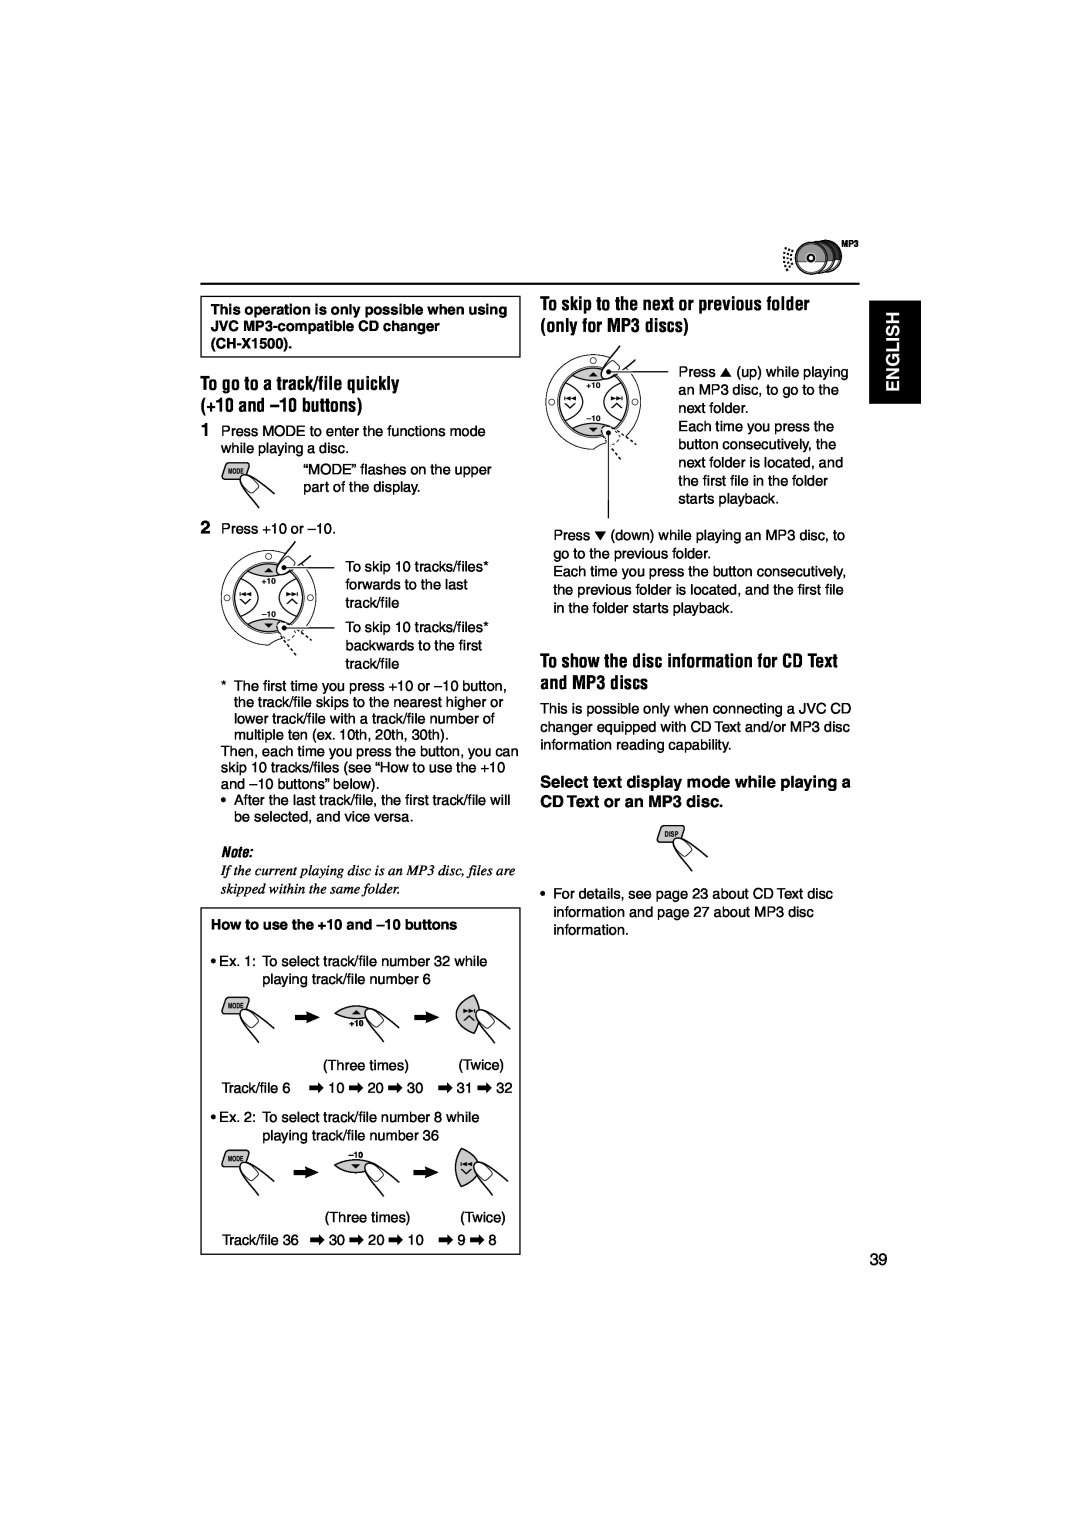 JVC GET0126-001A manual only for MP3 discs, To show the disc information for CD Text and MP3 discs, English 